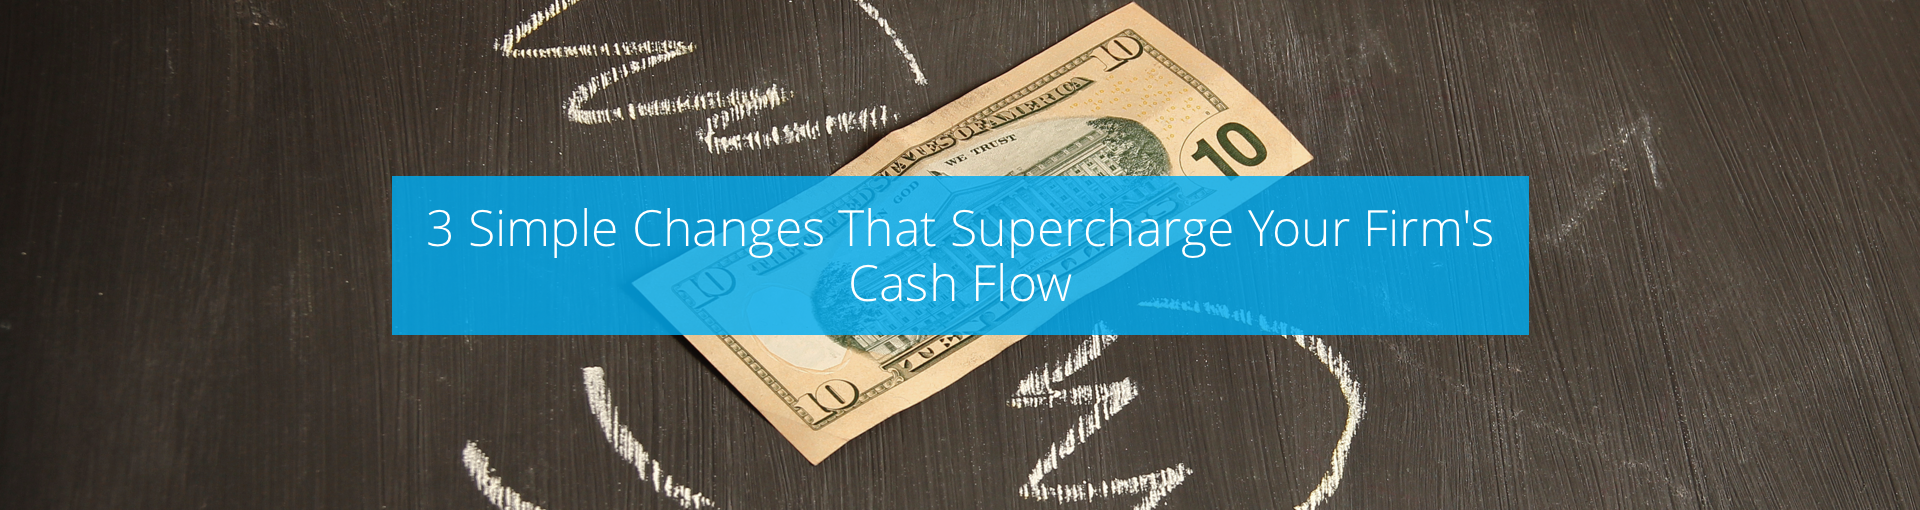 3 Simple Changes That Supercharge Your Firm's Cash Flow Featured Image